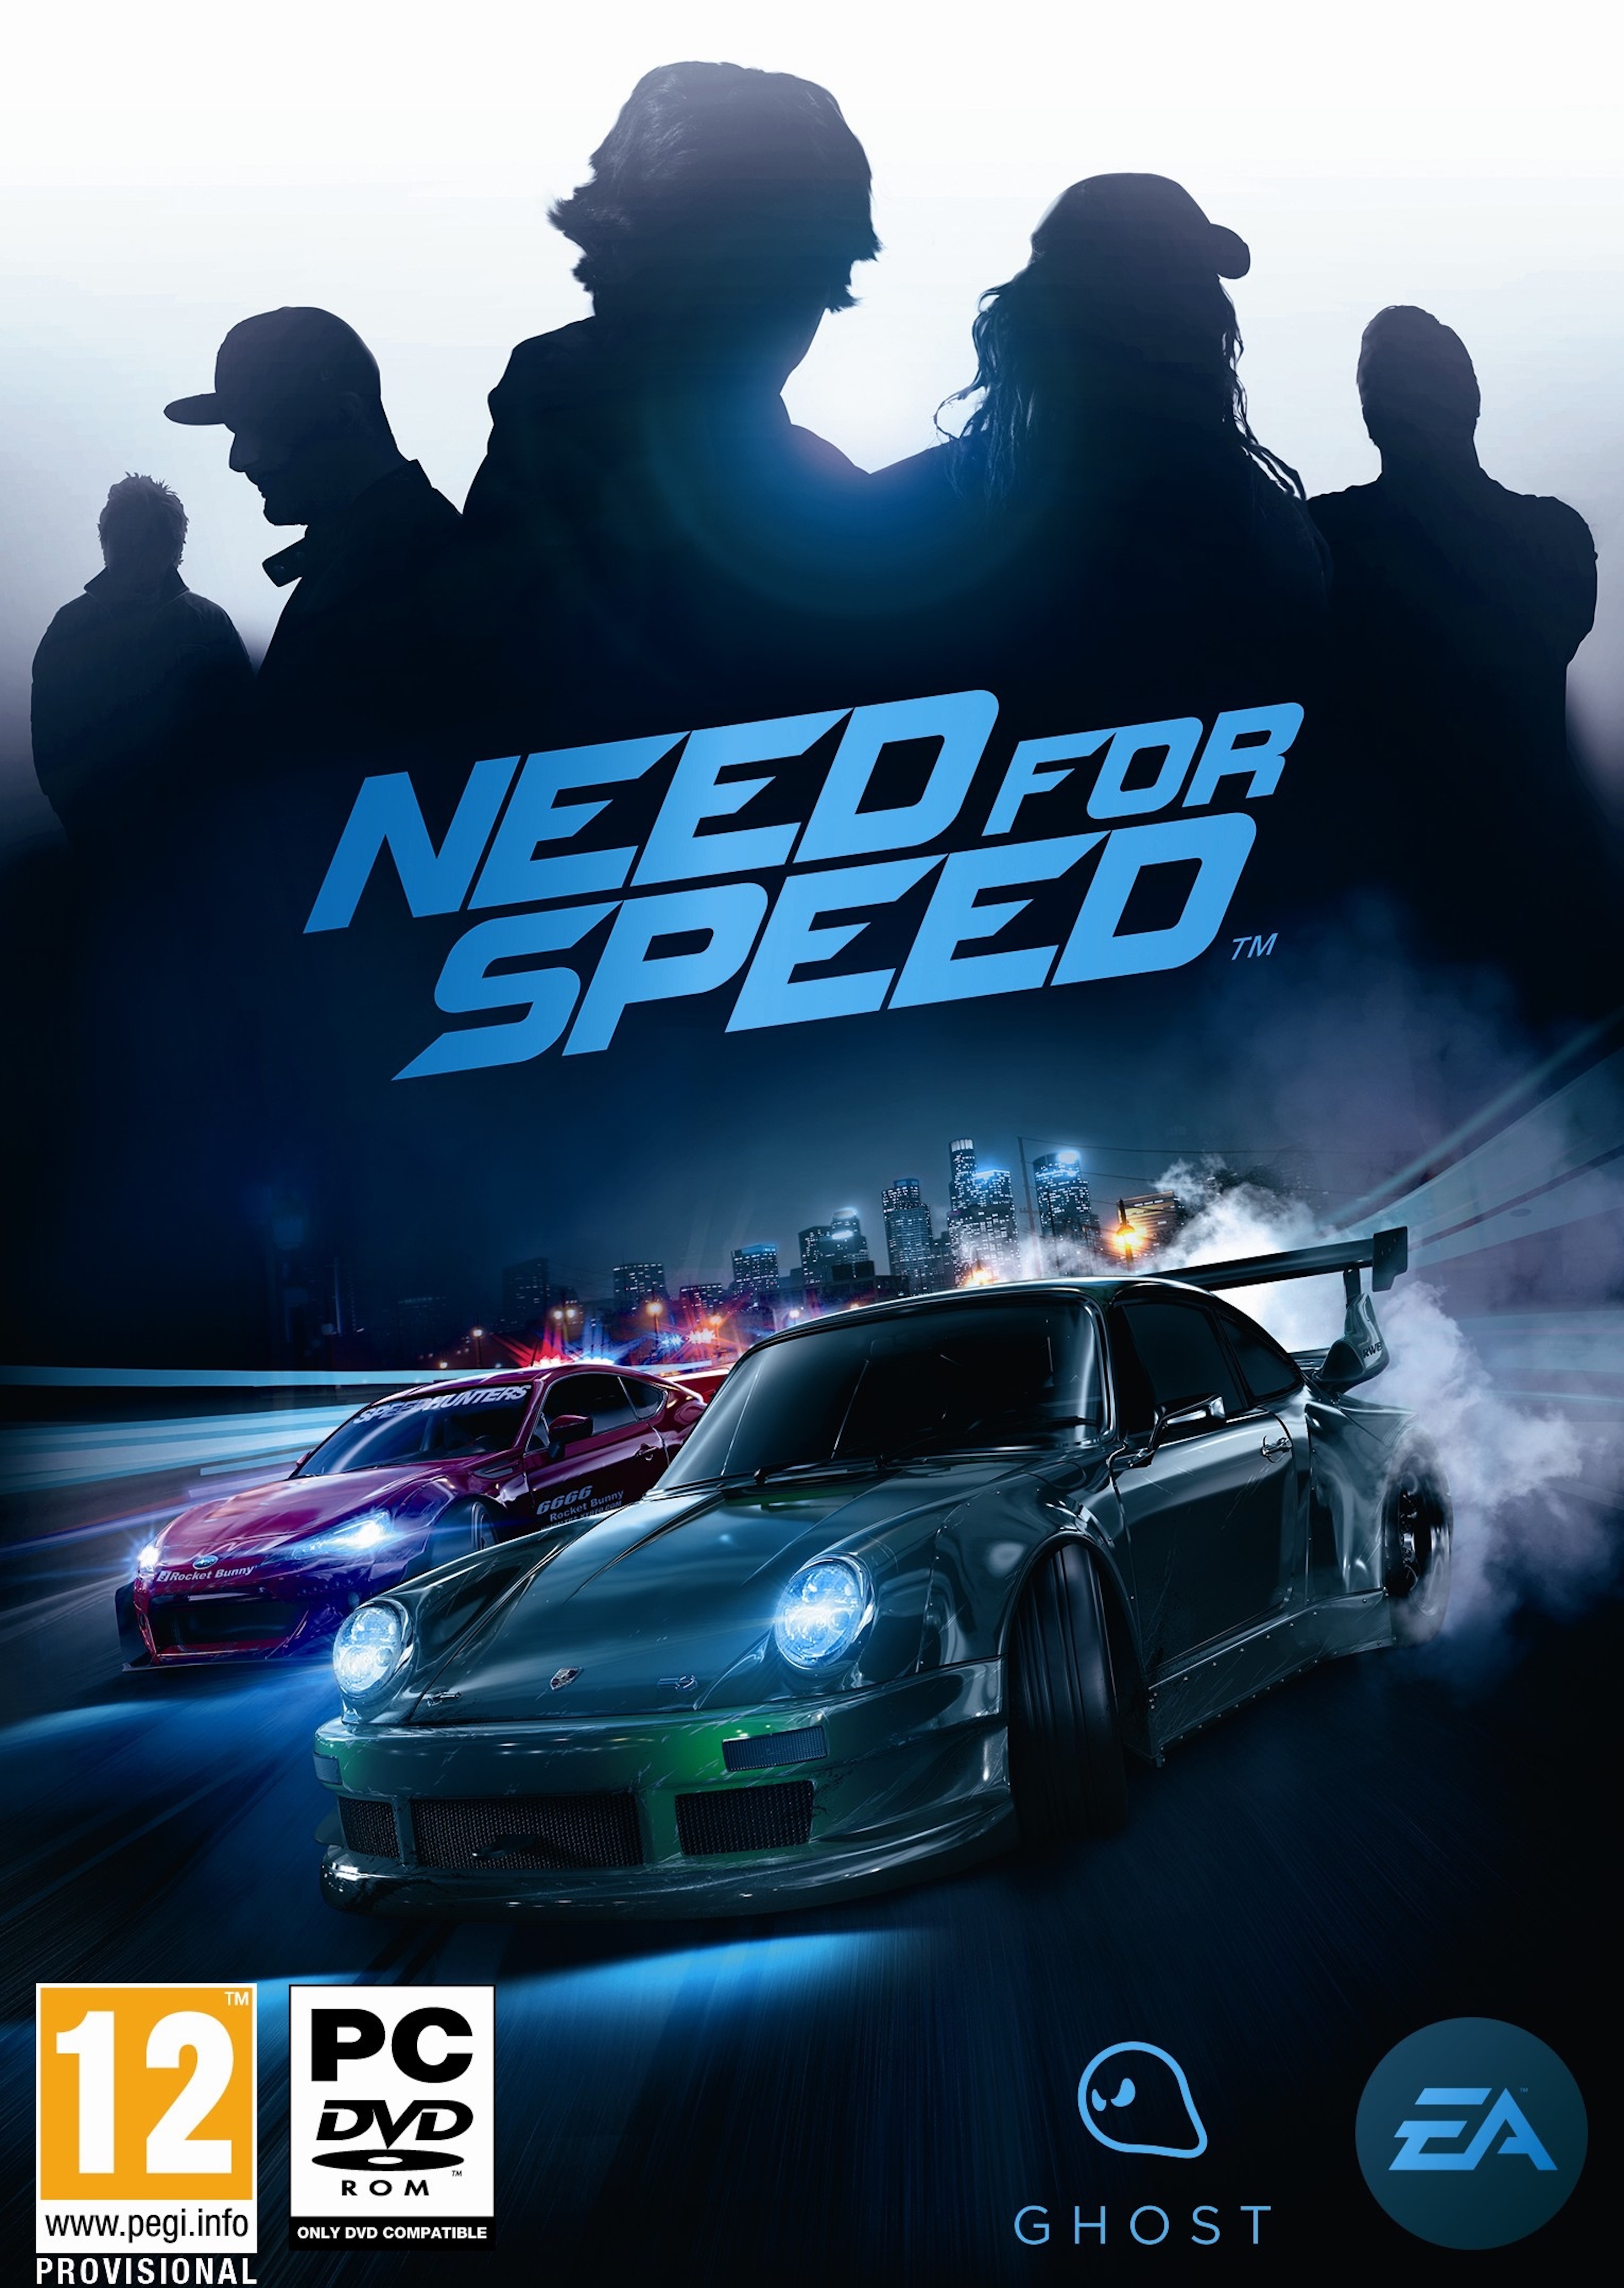 need for speed 2 movie trailer 2016